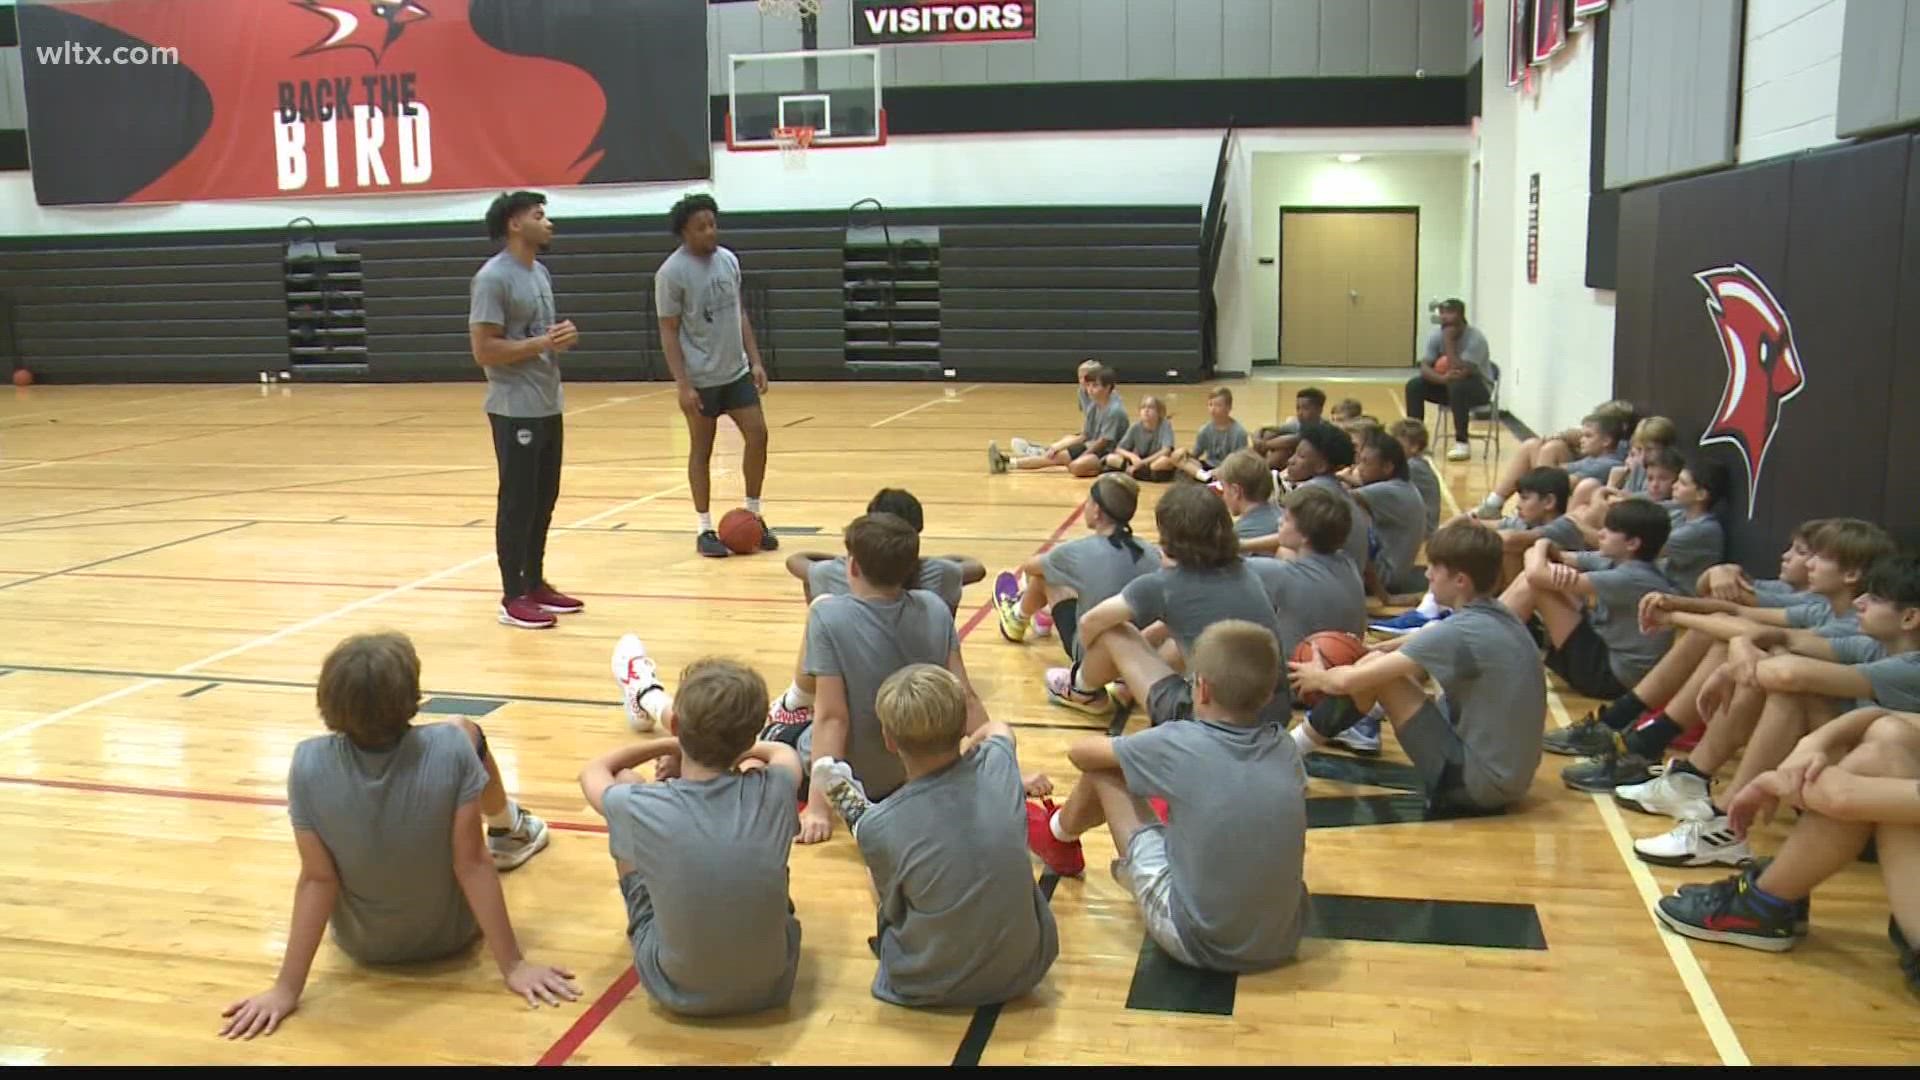 South Carolina guards Chico Carter, Jr. and Jacoby Wright hosted their Fall Basketball Camp at Cardinal Newman School.